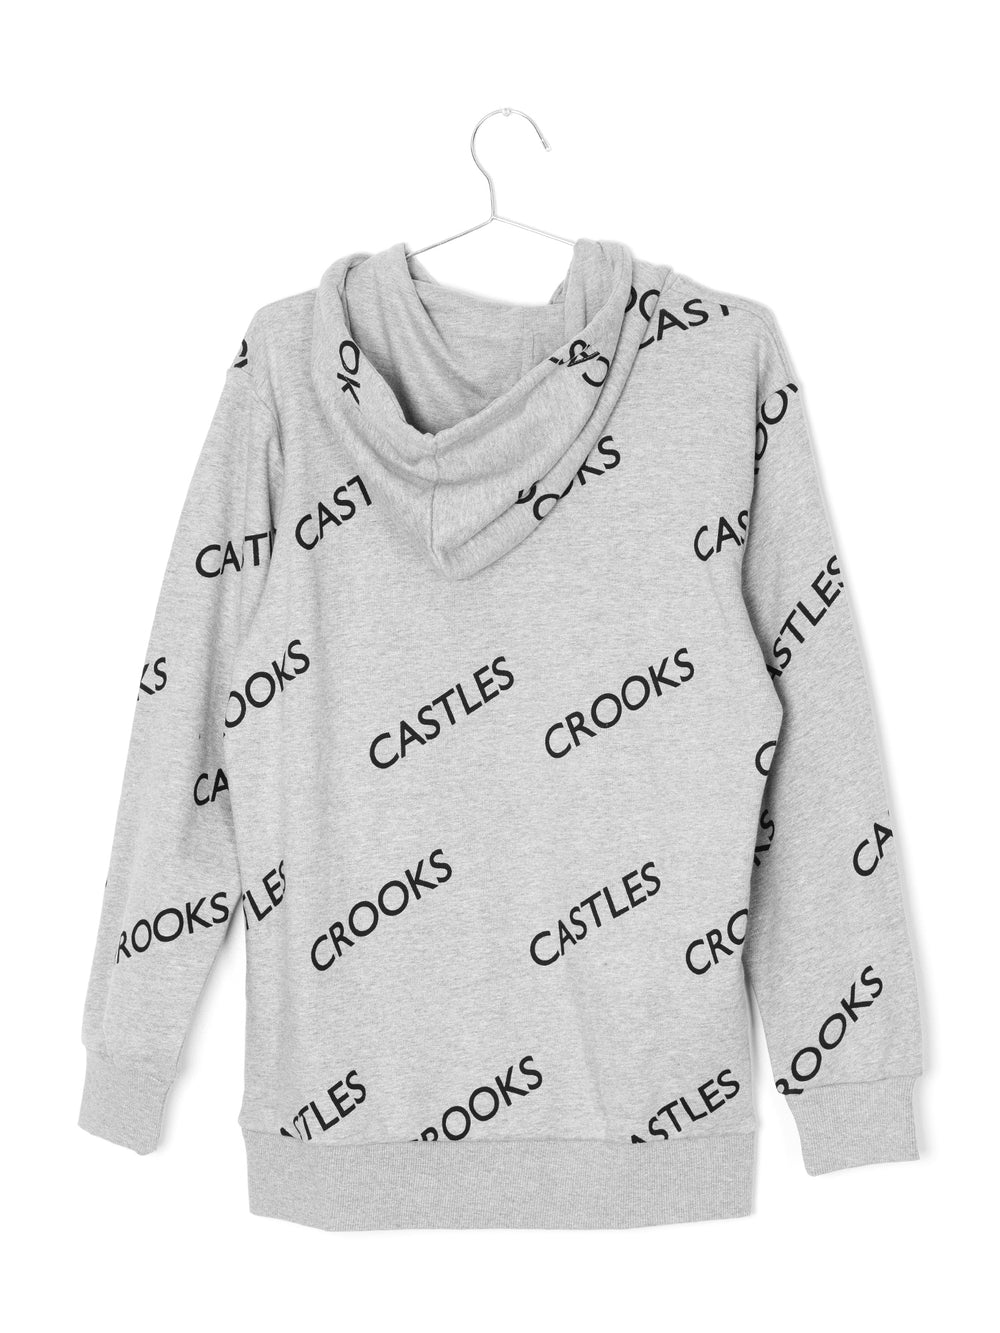 CROOKS & CASTLES NEW CORE LOGO PULLOVER HOODIE - CLEARANCE